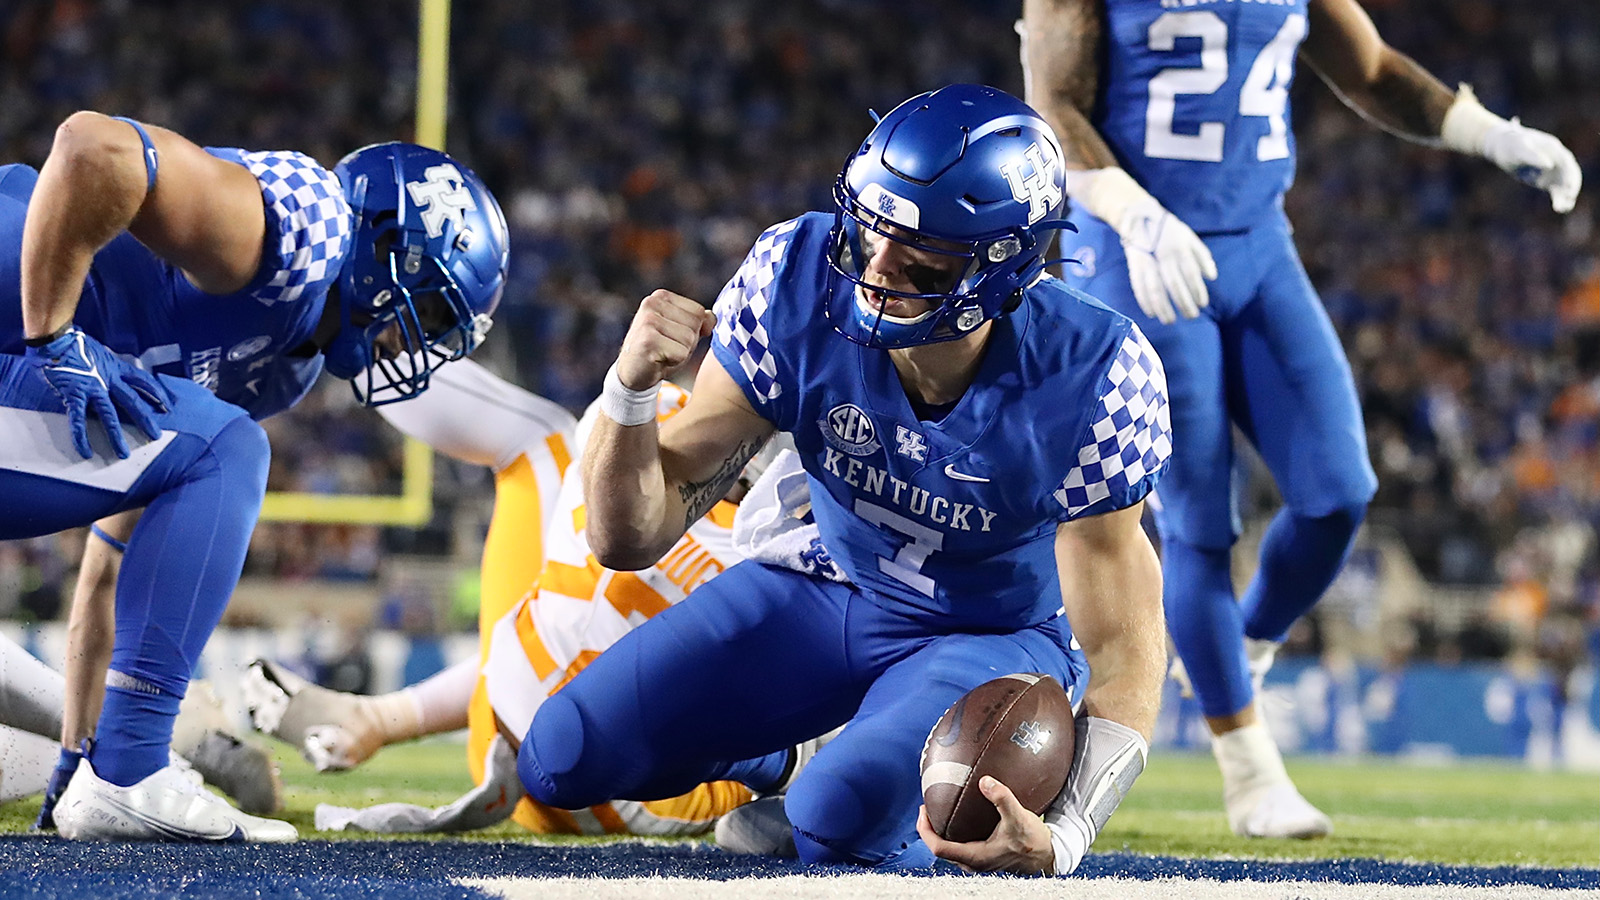 Kentucky Offense Continuing to Make Great Strides